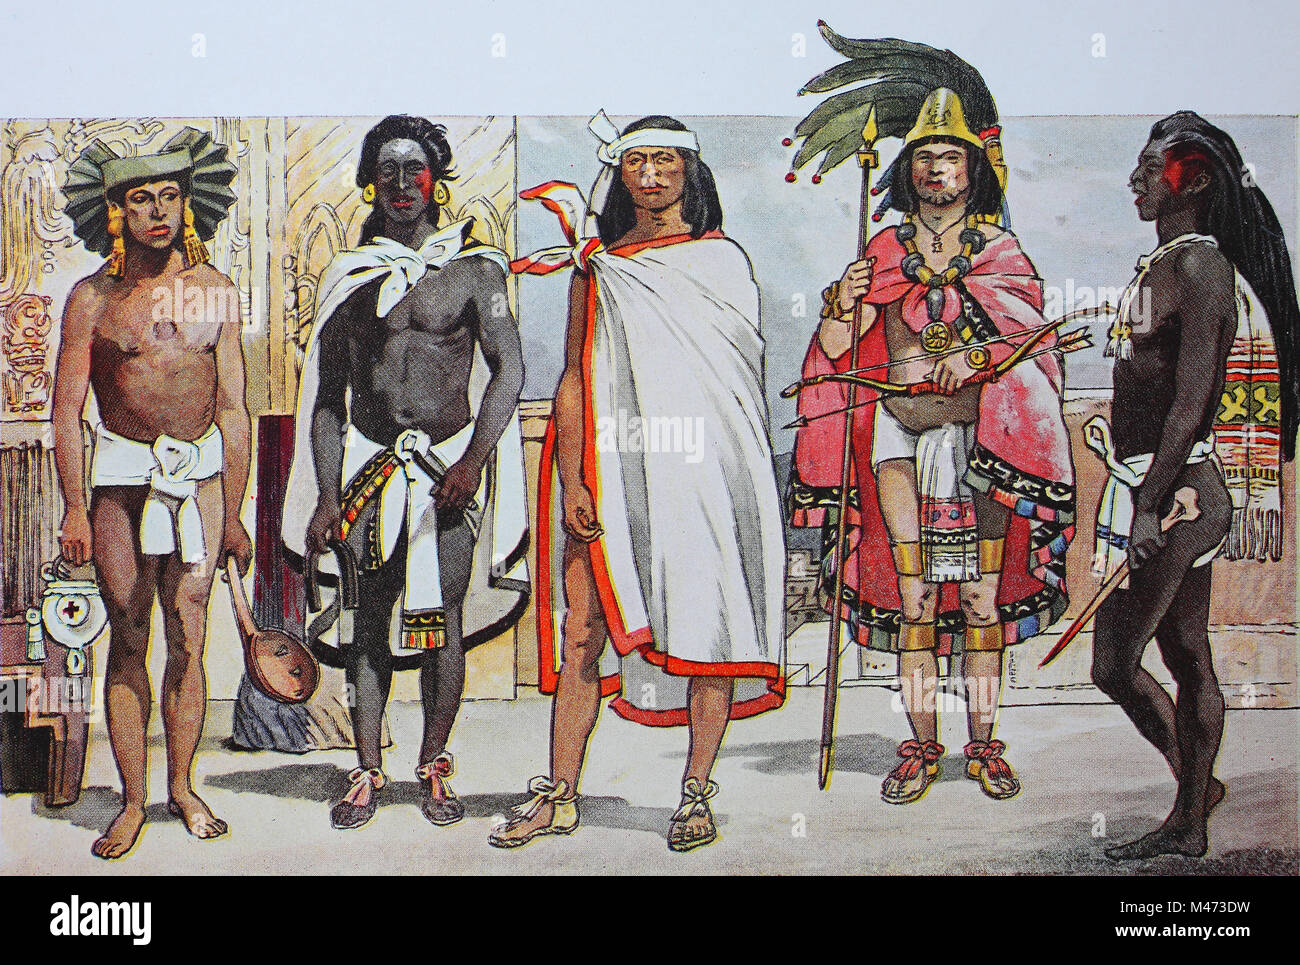 Clothing, fashion in Central America, around 1520, from left, priests of the rain god Tlaloc, then a sacrificial priest, one of the Mixtecs tribe, the king, perhaps Montezuma, with a gold diadem and plume, and a priest of Indian fakirs style self-tormenting, digital improved reproduction from an original from the year 1900 Stock Photo